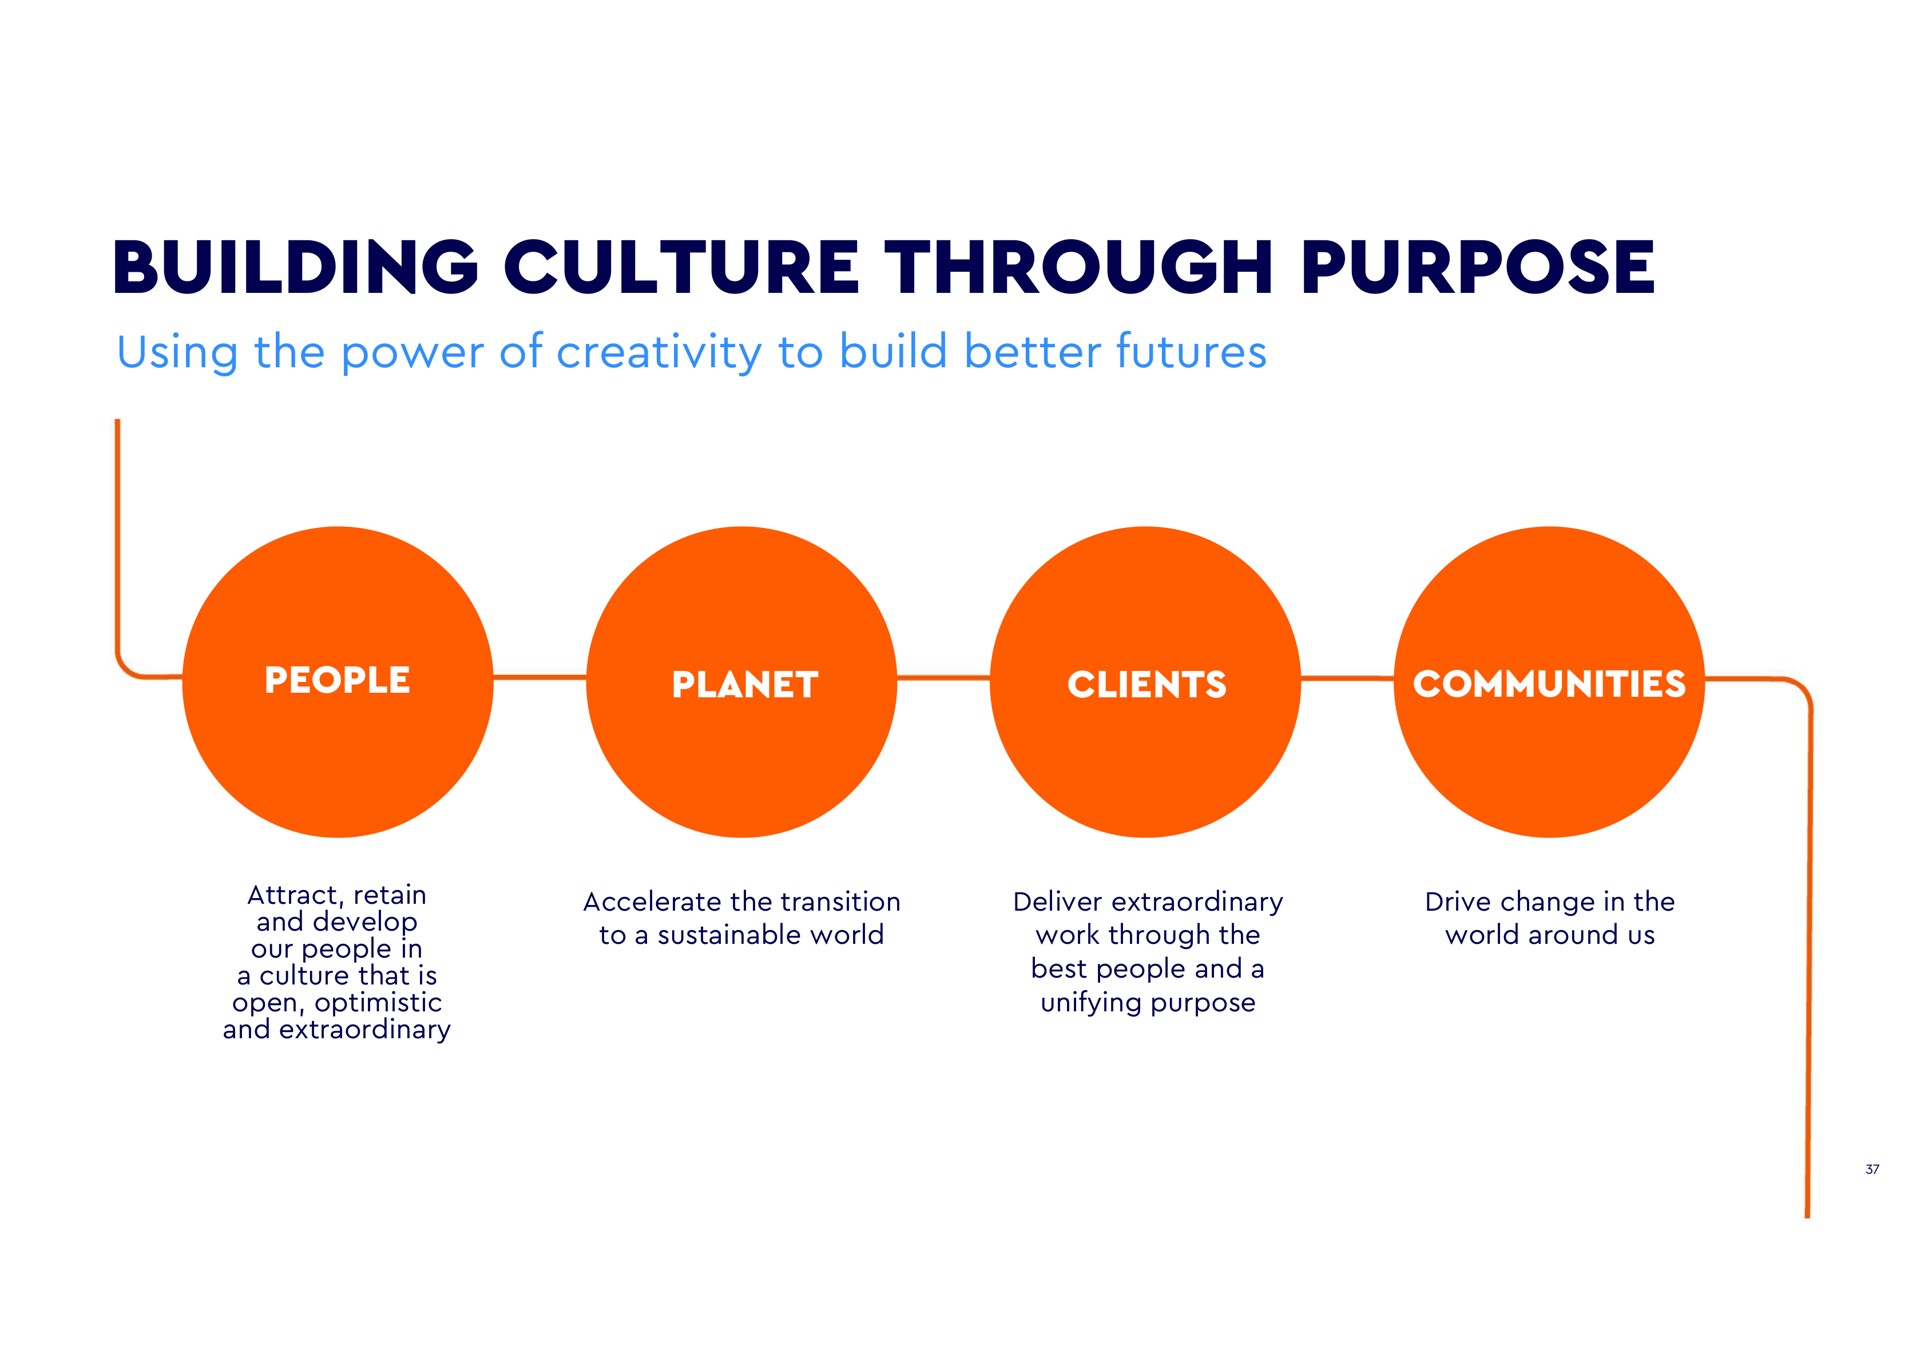 building culture through purpose using the power of creativity to build better futures people communities clients planet attract retain and develop our people in a that is open optimistic and extraordinary accelerate the transition to a sustainable world deliver extraordinary work the best people anda unifying drive change in the world around us | WPP